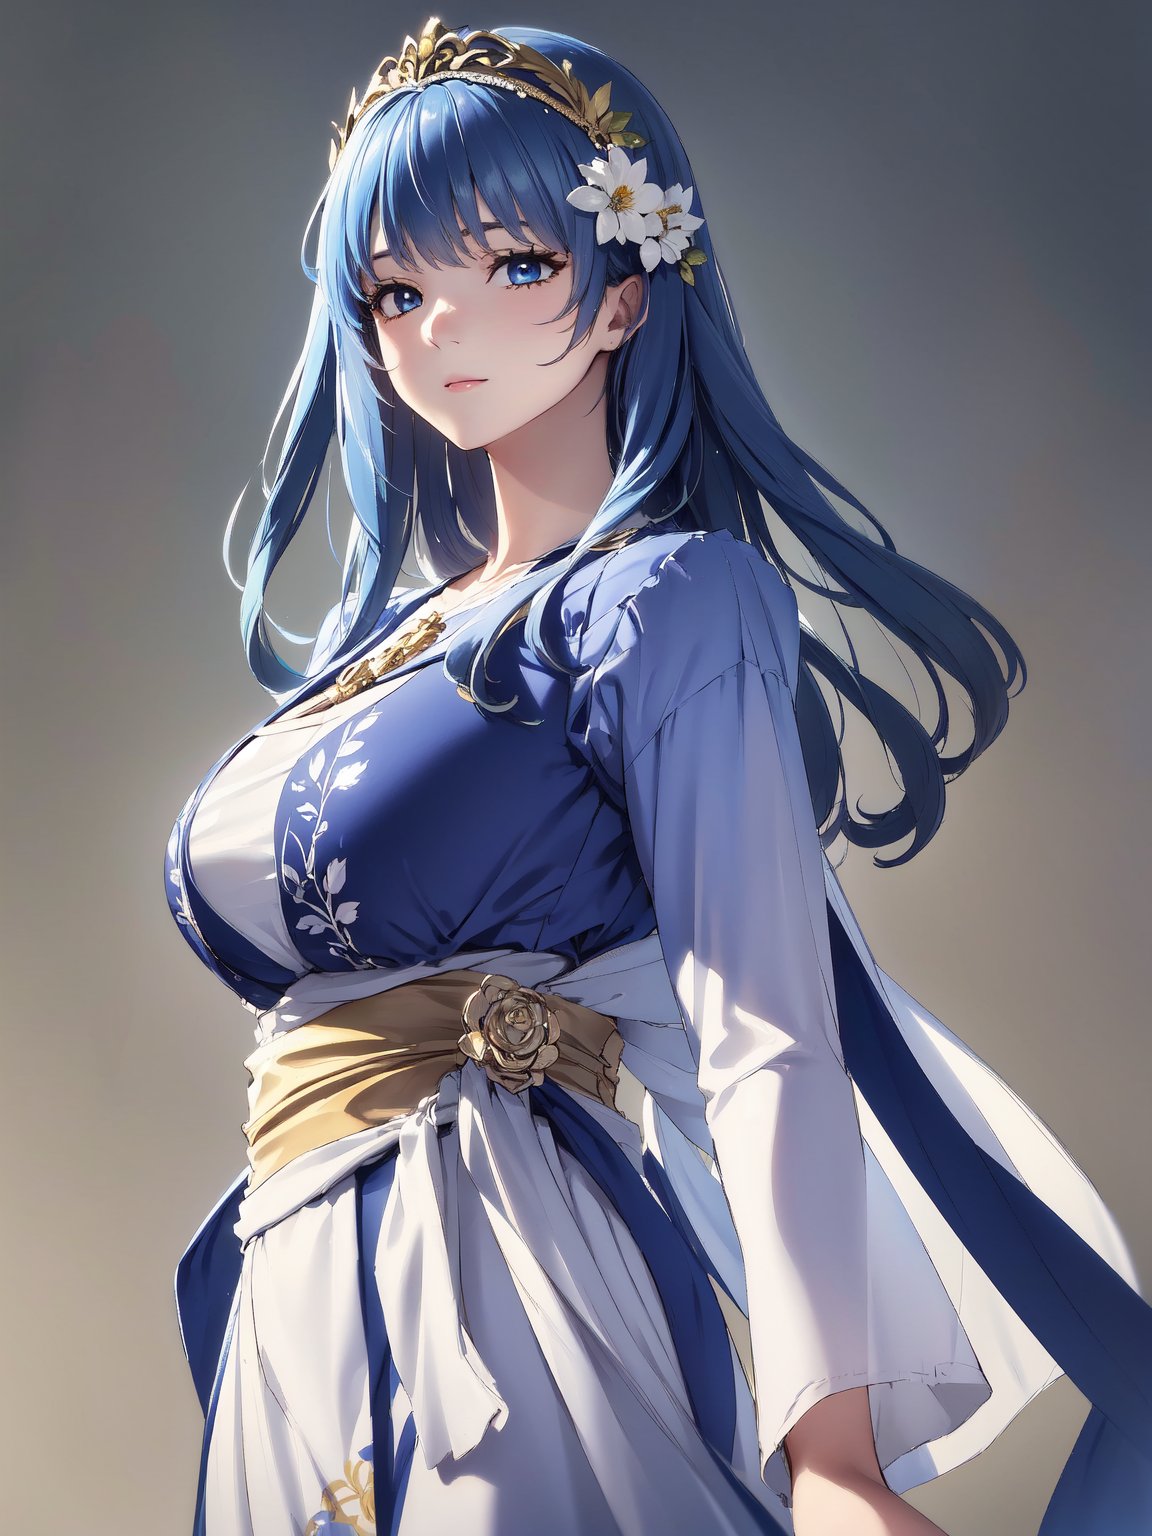 8k, masterpiece, ultra-realistic, best quality, high resolution, high resolution, 1girl, solo, reah, blue hair, blue eyes, thin eyebrow, busty and sexy girl, standing gracefully, serene expression,
FLOWER headdress adorned with gold accents and pearls, FLOWER PATTERN KIMONO, gold embroidery and gemstones, flowing robe or gown,
COLORFUL SMOKE BACKGROUND, rich golds and glowing whites,
luxurious, elegant, detailed